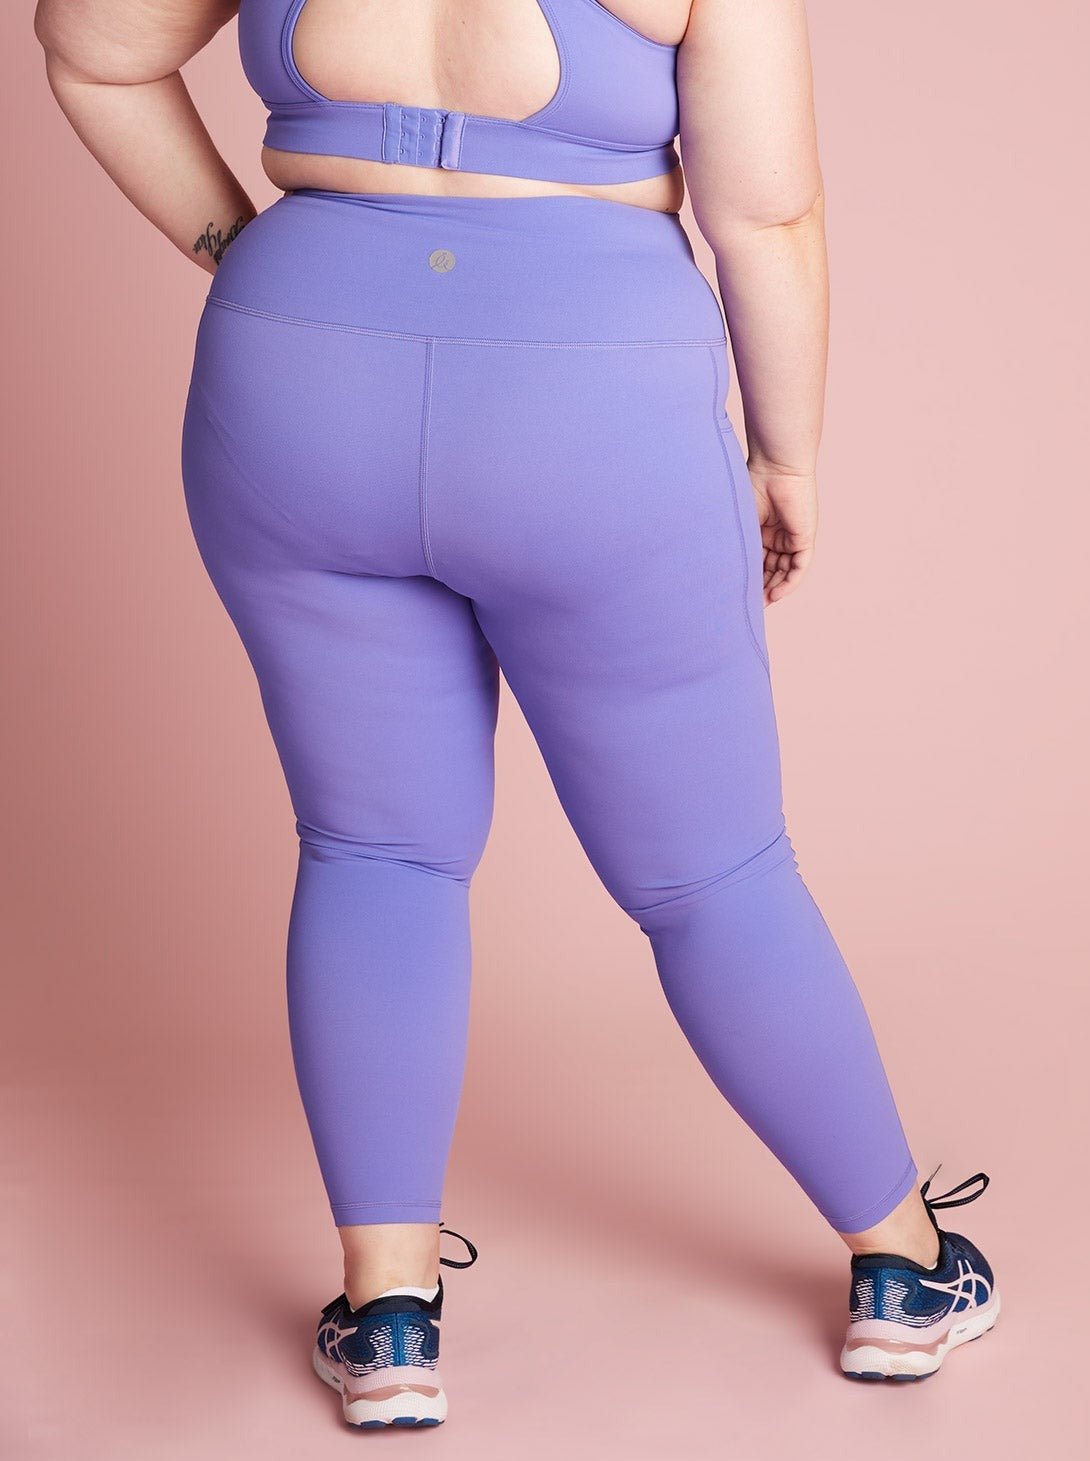 Periwinkle Purple Everyday Legging - 7/8 length - squat proof tights on plus size woman